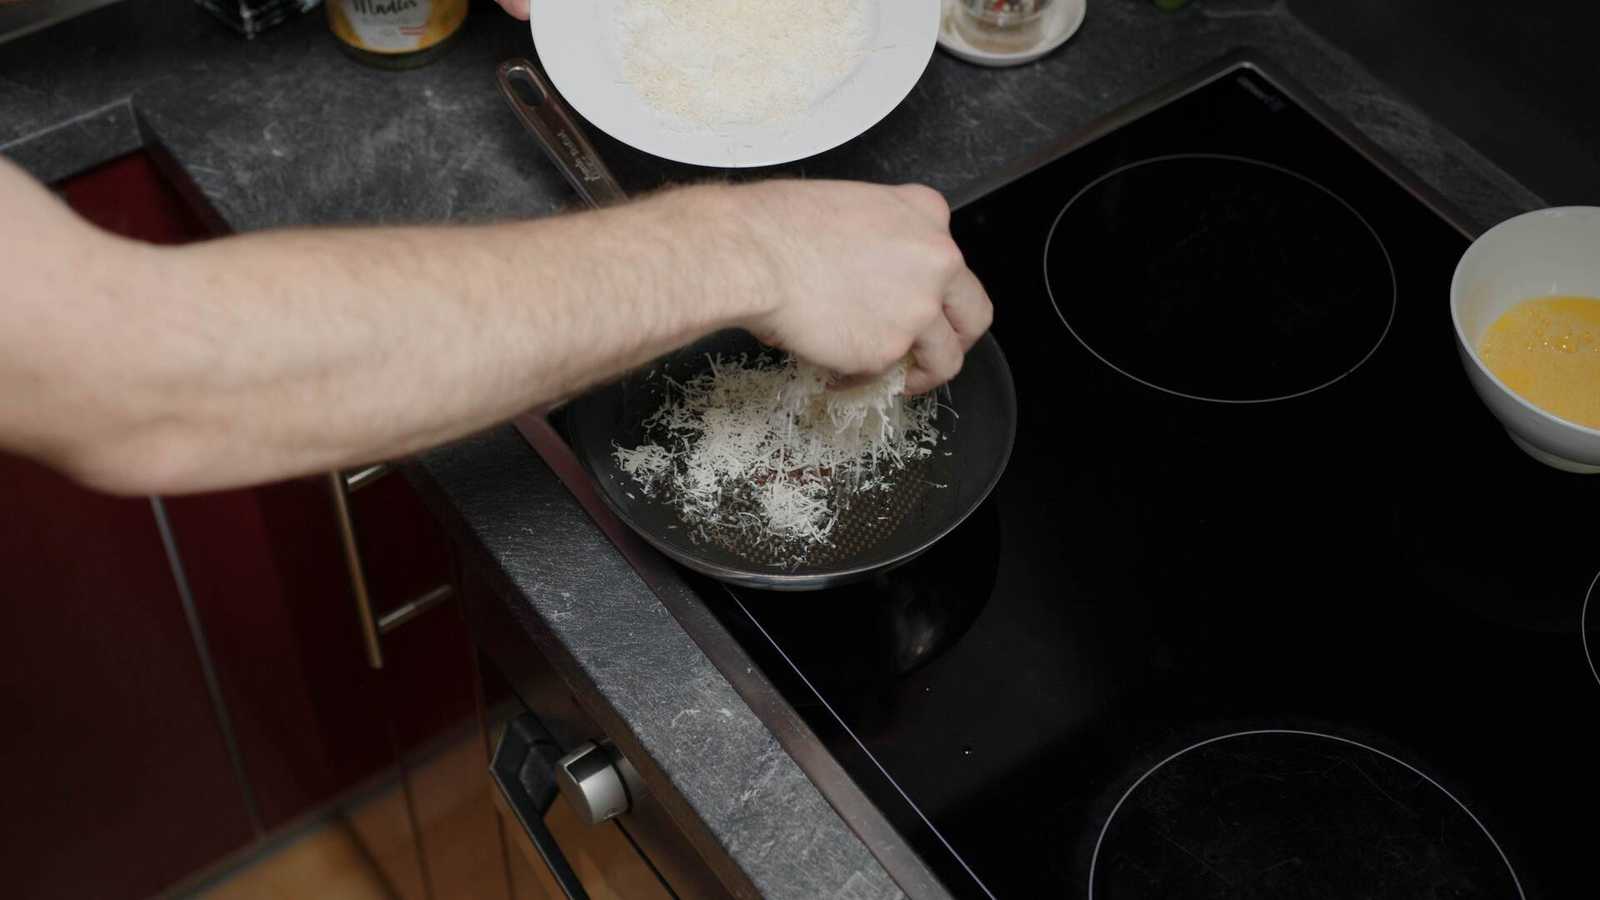 Parmesan being added into the pan